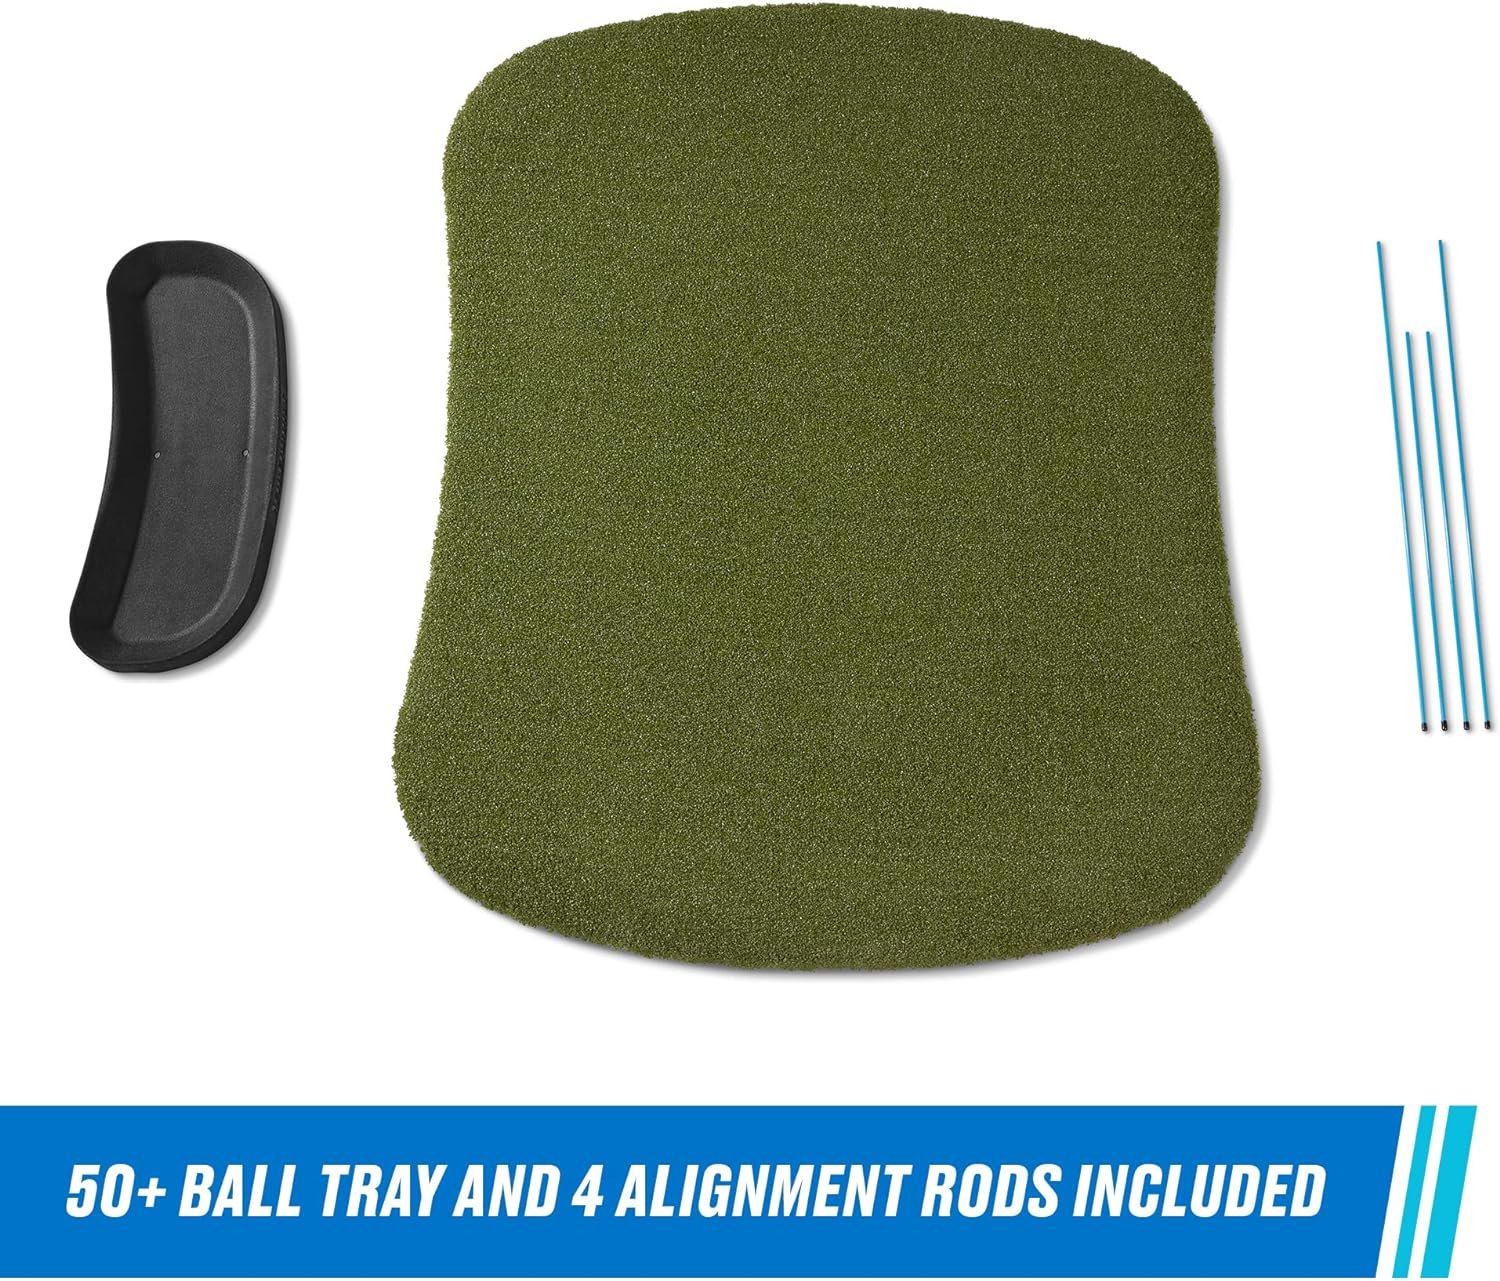 Fiberbuilt Golf Hourglass Hitting Mat - Premium Indoor/Outdoor Performance Turf with Non-Slip Rubber Foam Padding | Comes with 4 Alignment Sticks and 1 Golf Ball Tray